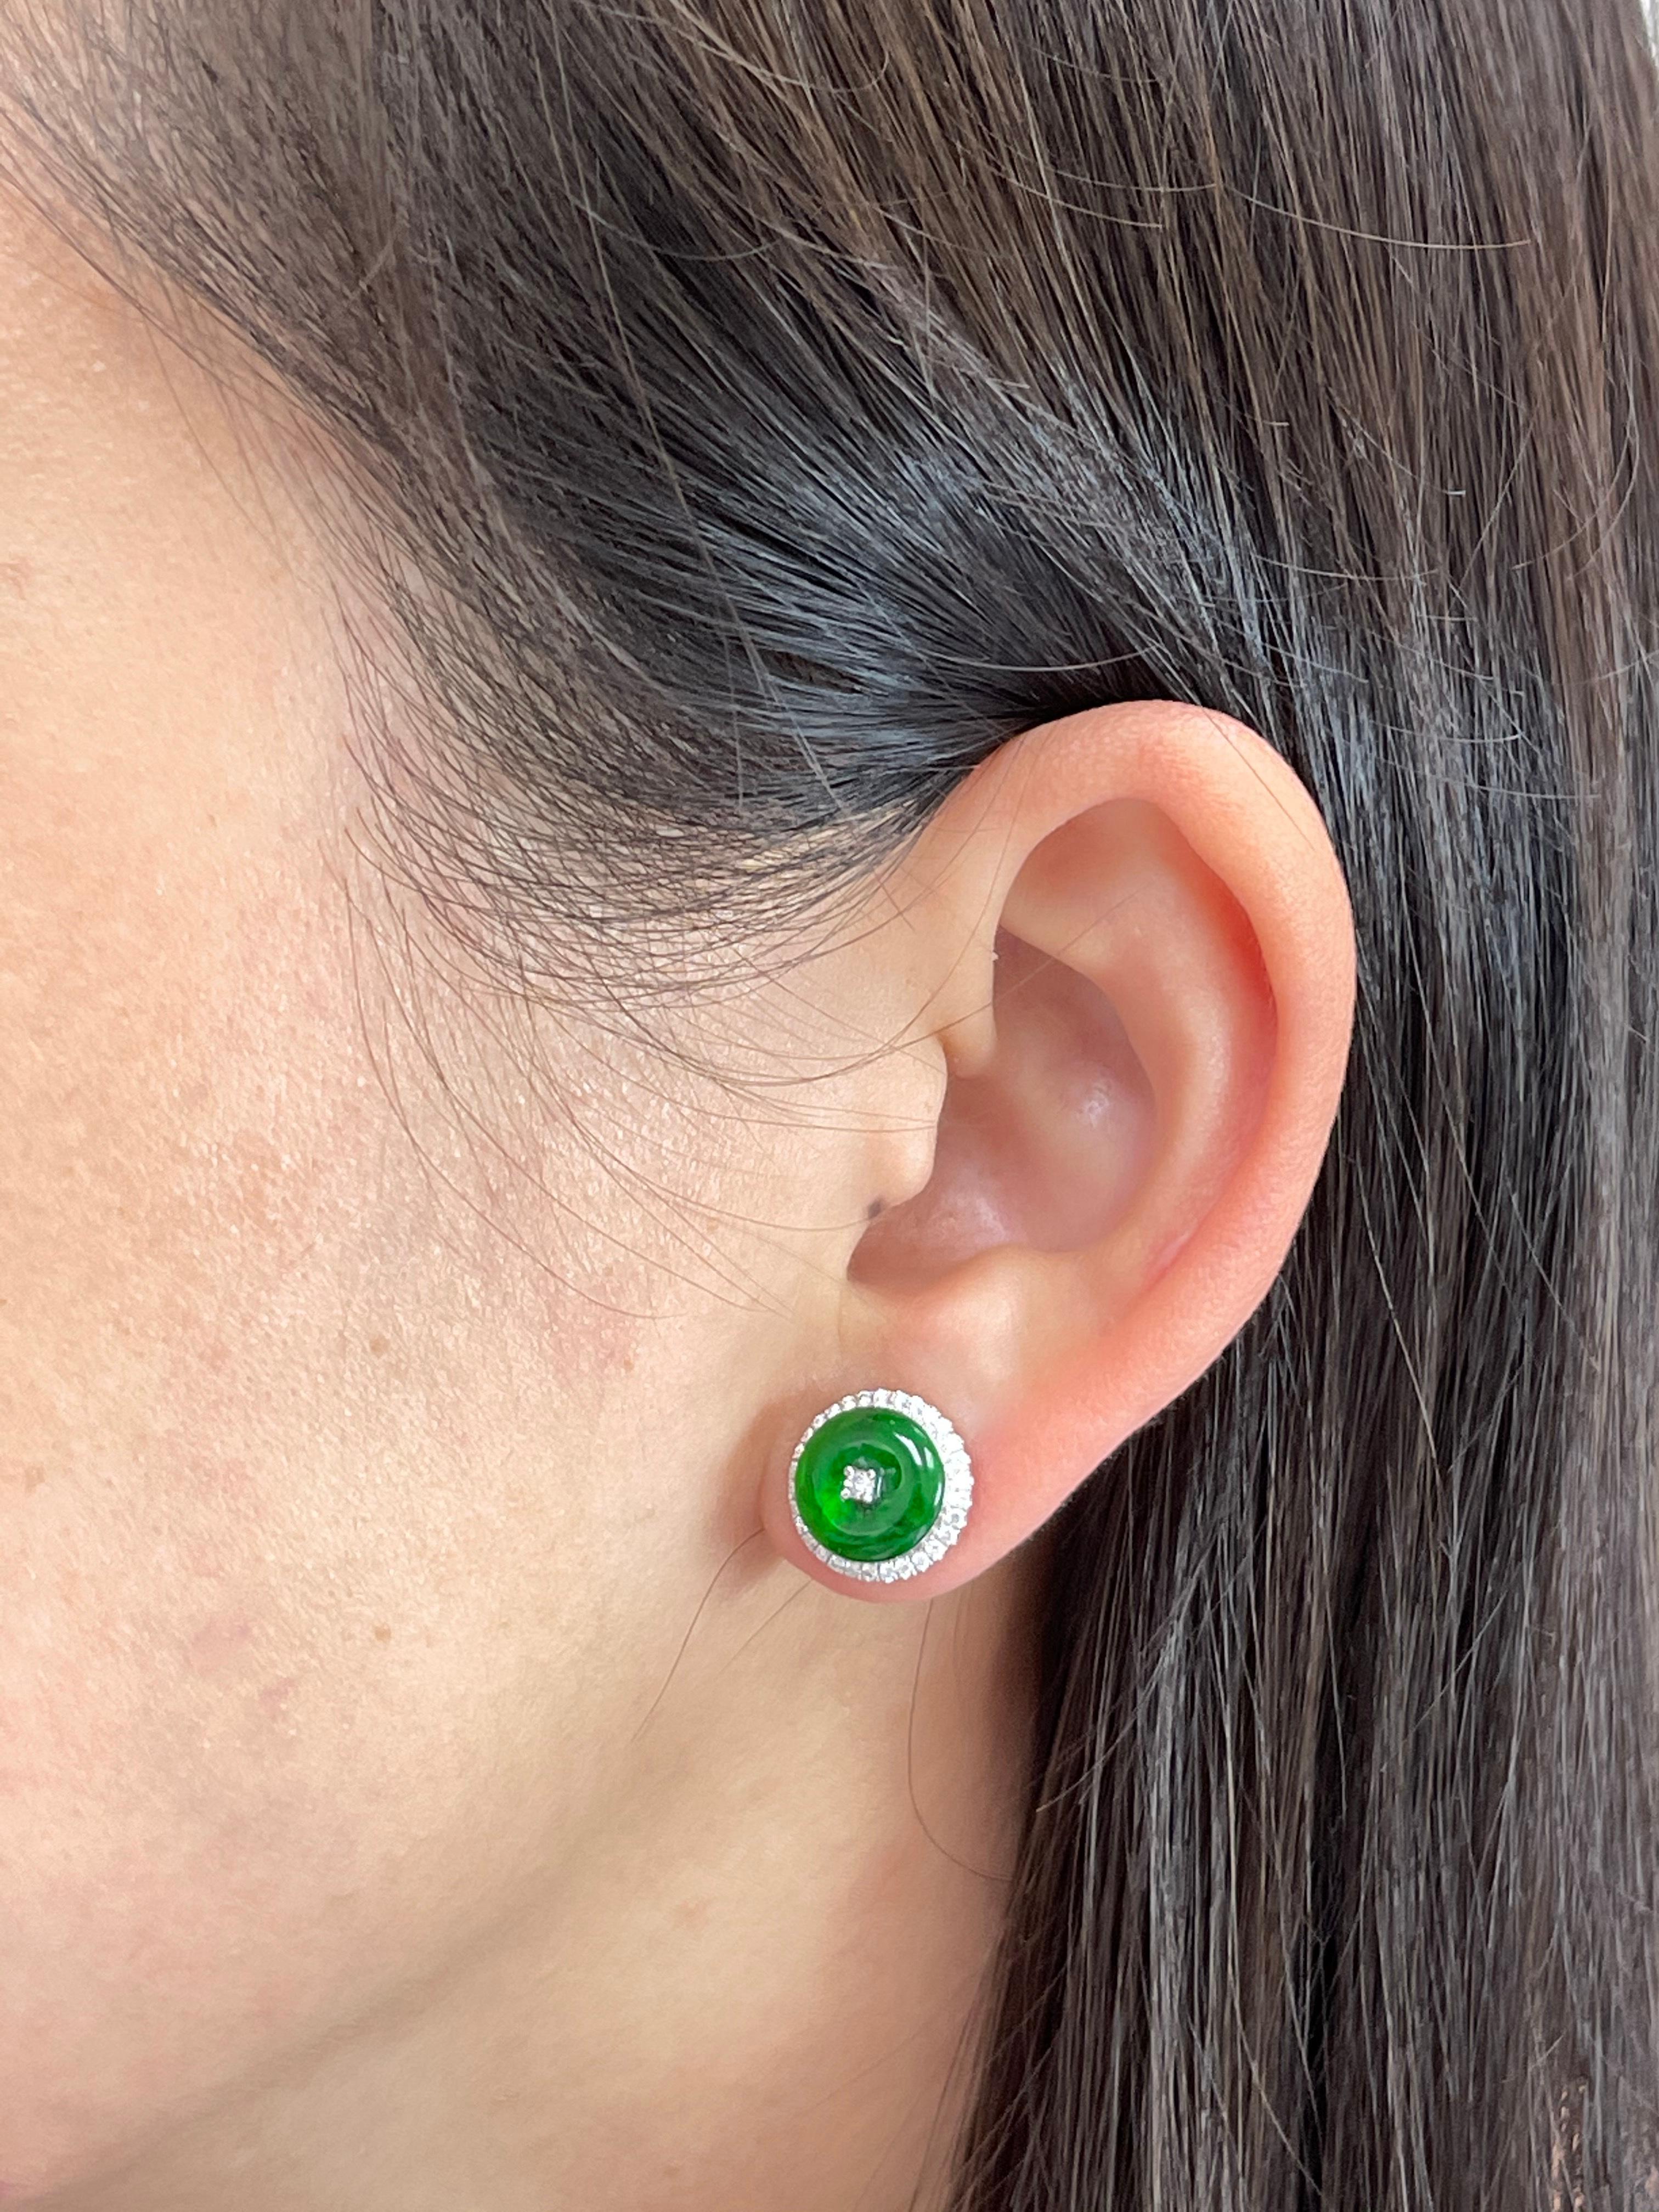 Here is a nice pair of spinach green Jade earrings. The diameter is about 12mm each. The earrings are set in 18k white gold and diamonds. There are 62 white diamonds that makes up the halo totaling 0.41cts. The untreated / unenhanced natural jade is